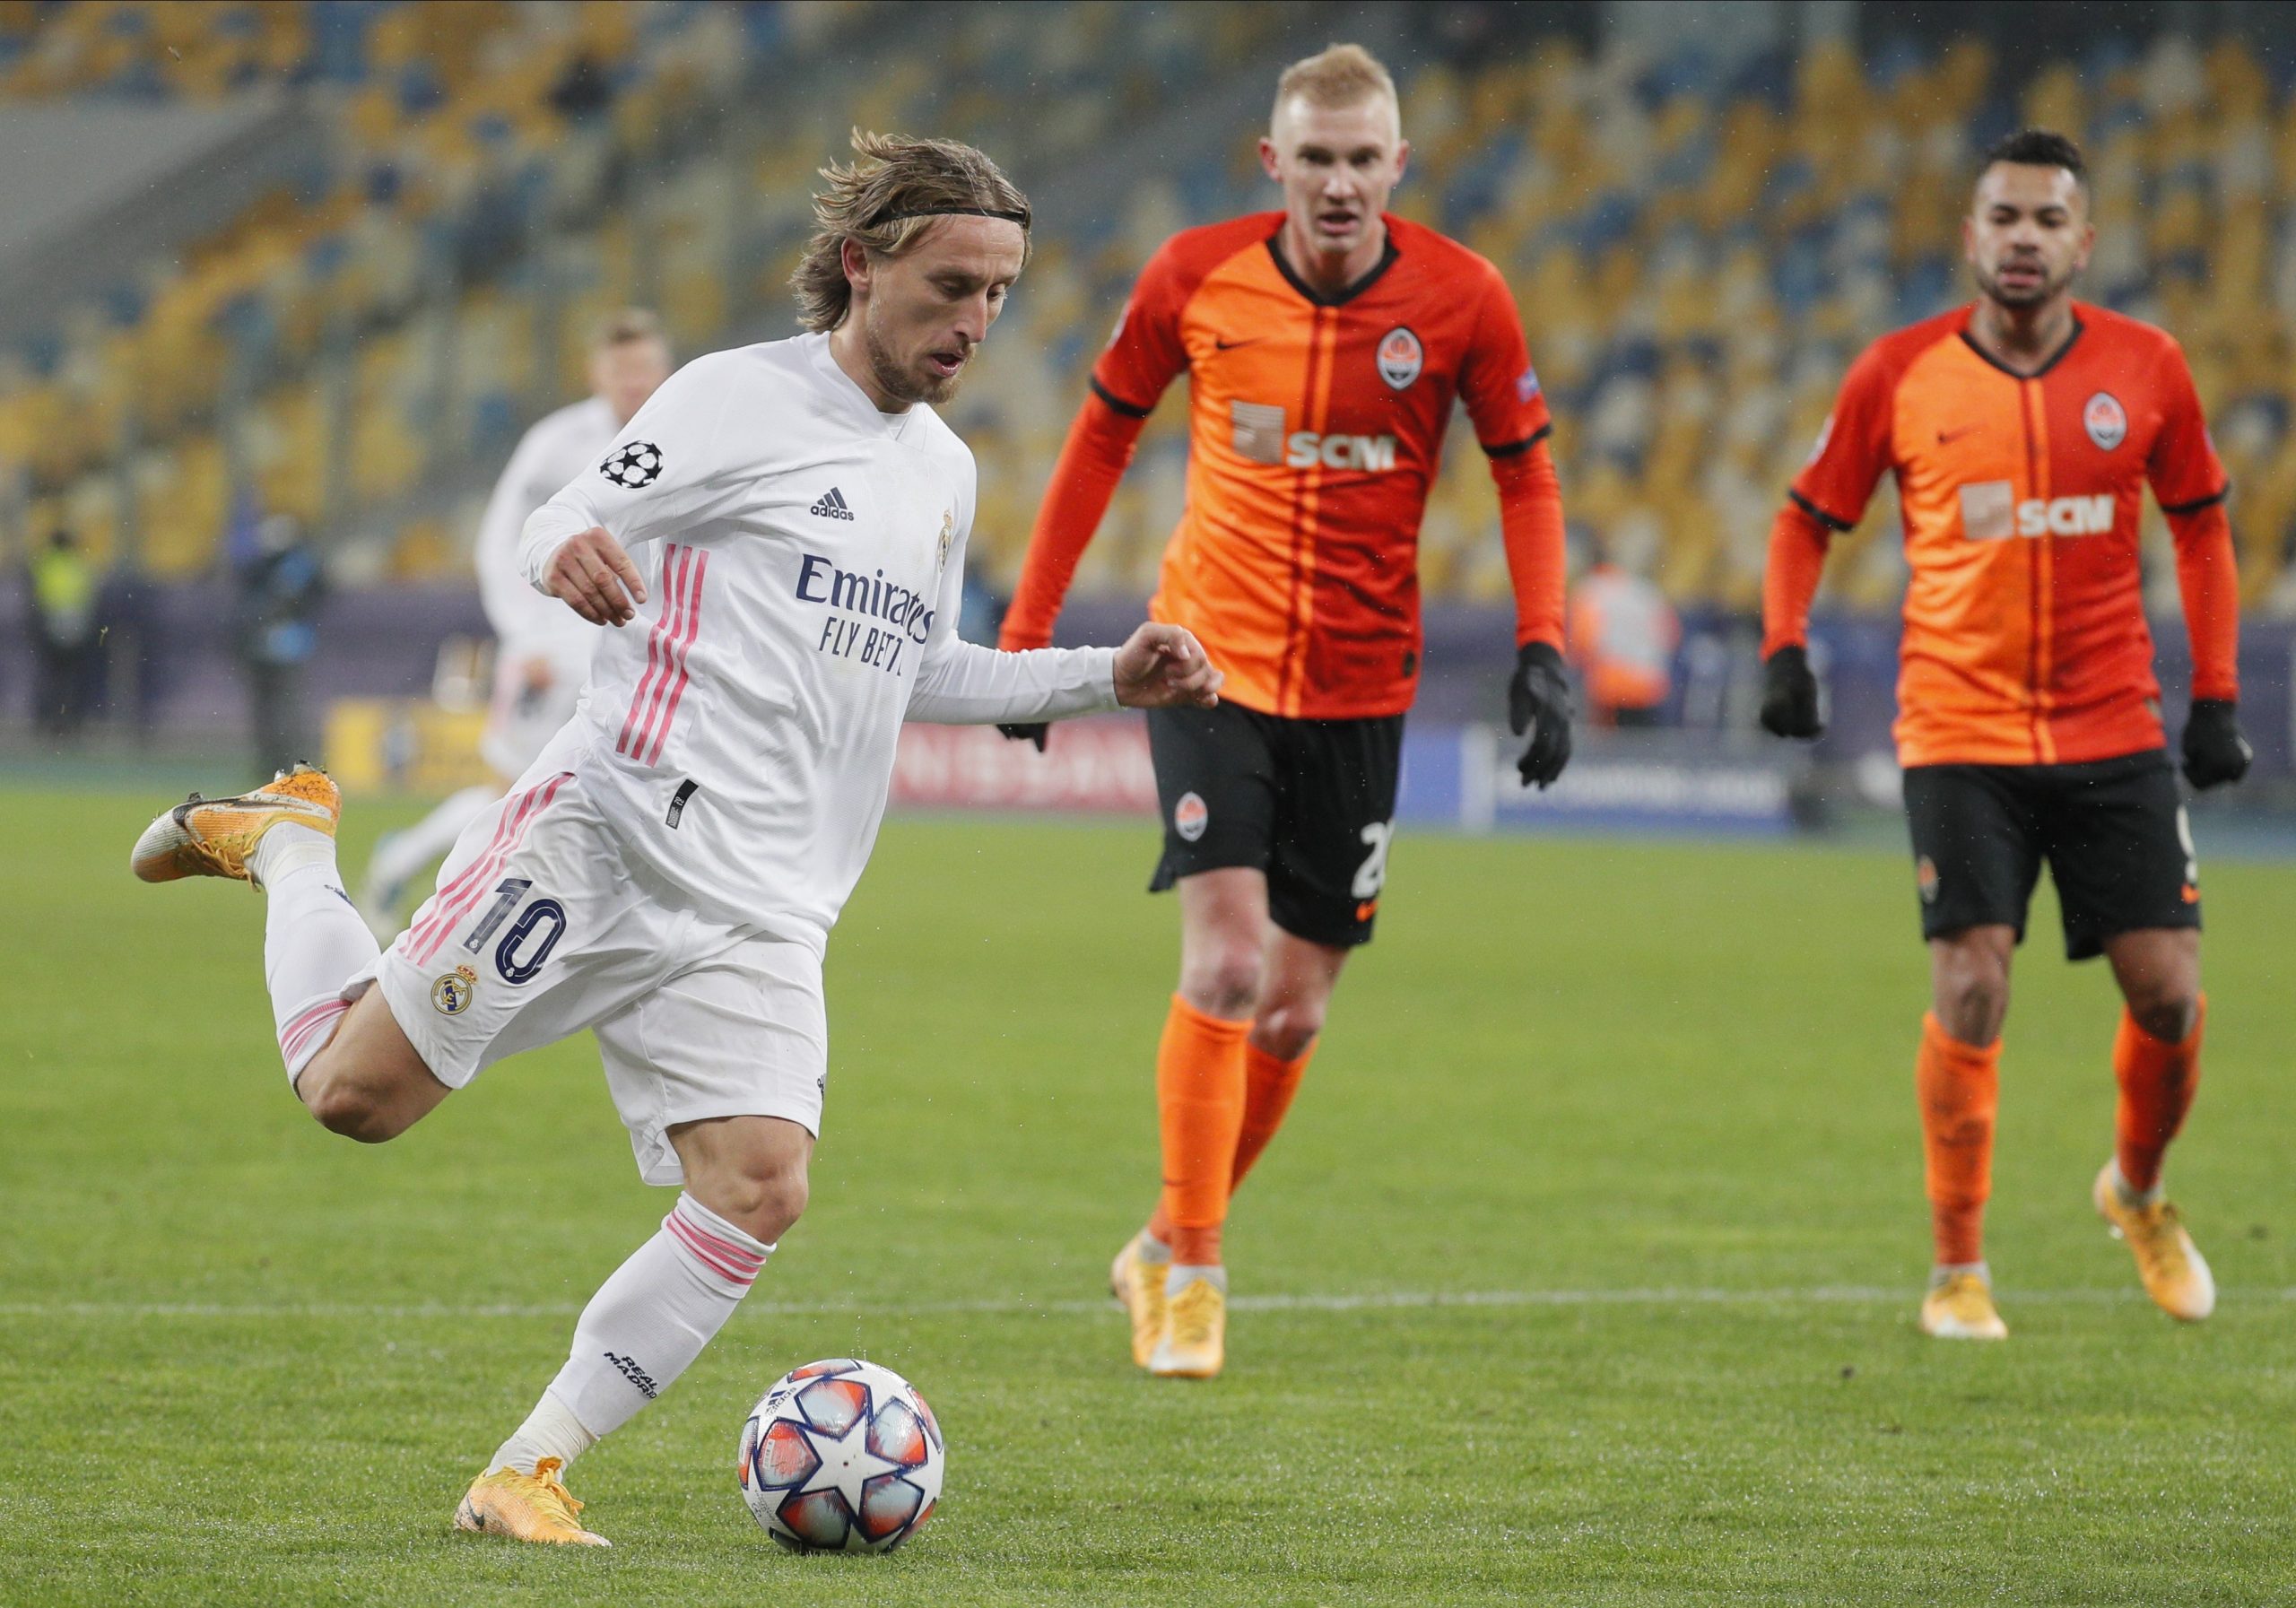 epa08855575 Luka Modric (L) of Real Madrid in action during the UEFA Champions League group B match between Shakhtar Donetsk and Real Madrid in Kiev, Ukraine, 01 December 2020.  EPA/Sergey Dolzhenko